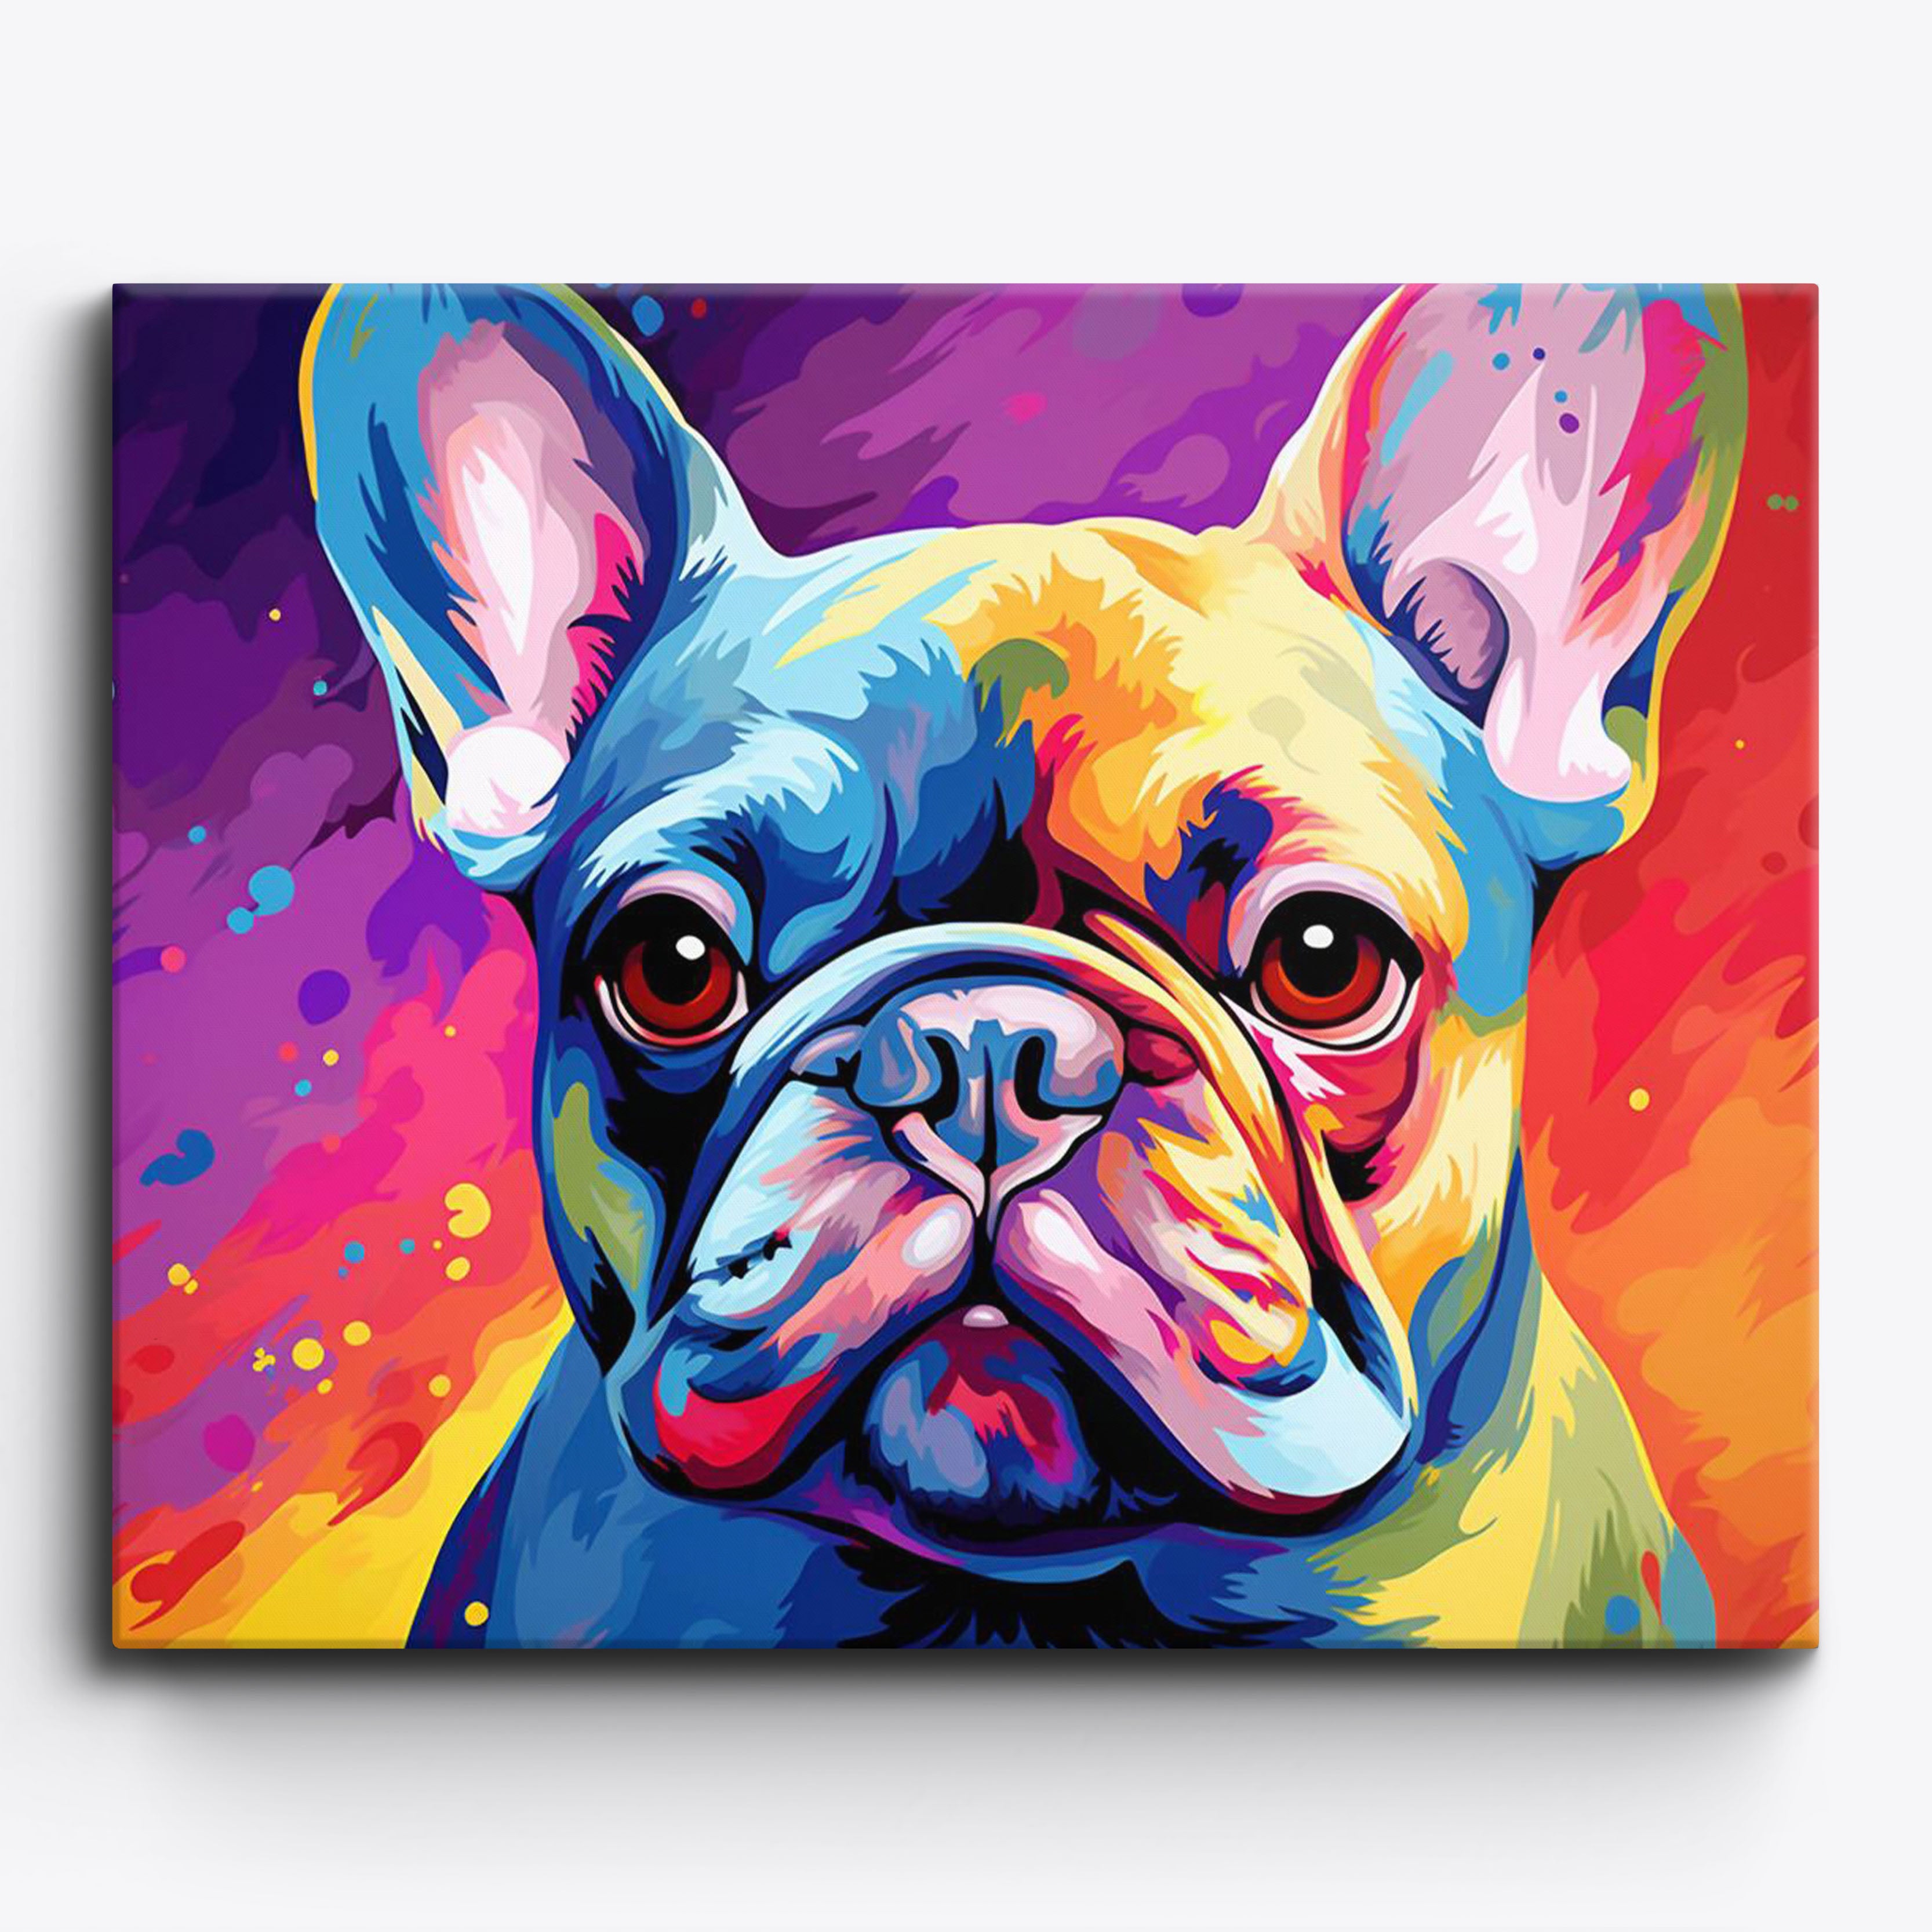 Lounge Pup' Paint by Numbers Kit | Vibrant Canine Craft